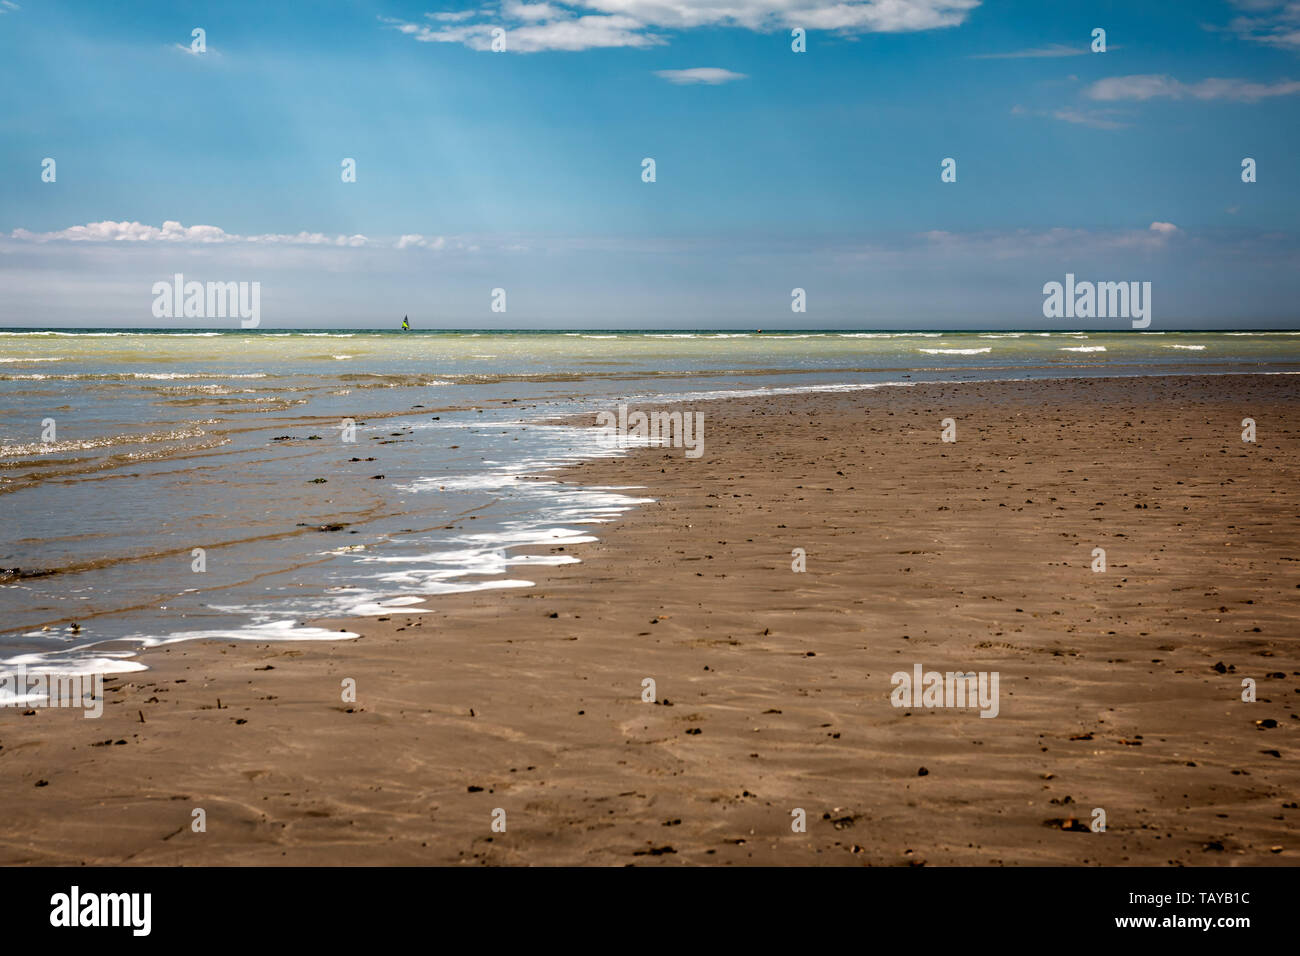 Empty beach with the sea lapping on a sandy beach in Worthing, West Sussex, UK Stock Photo